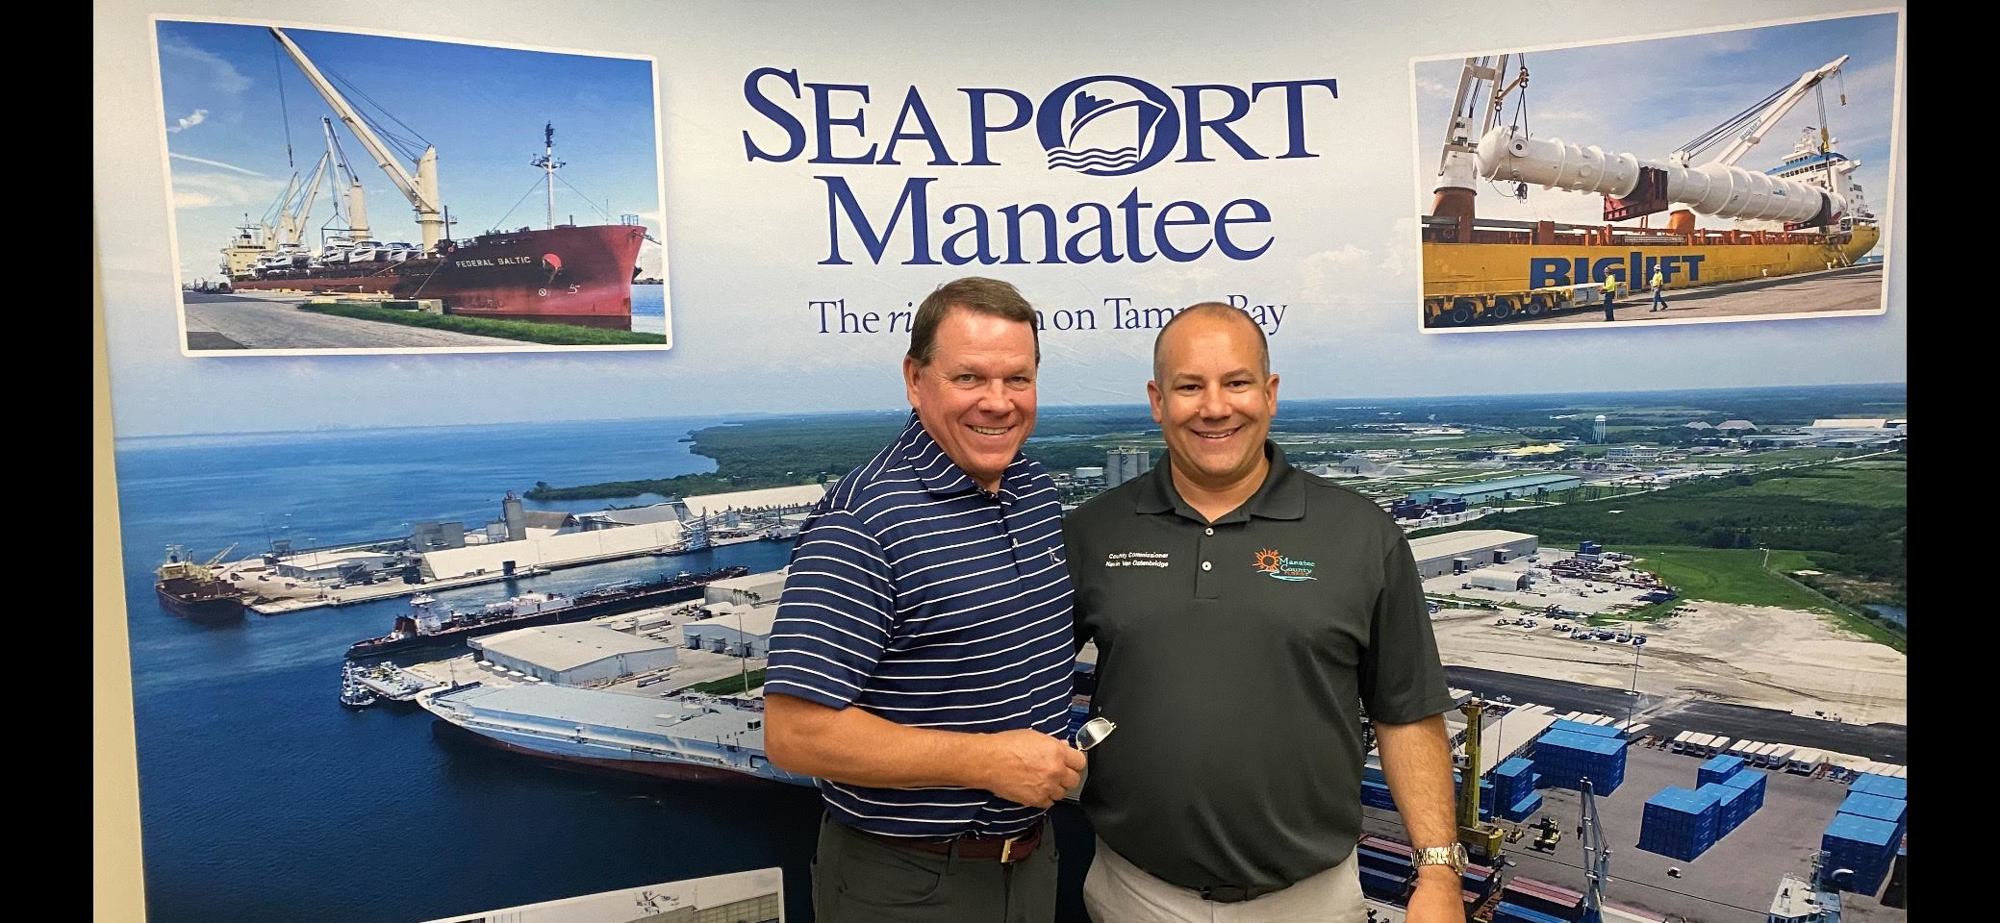 Rep. Sam Graves and Commissioner Kevin Van Ostenbridge met at SeaPort Manatee prior to the flight. (Courtesy photo)